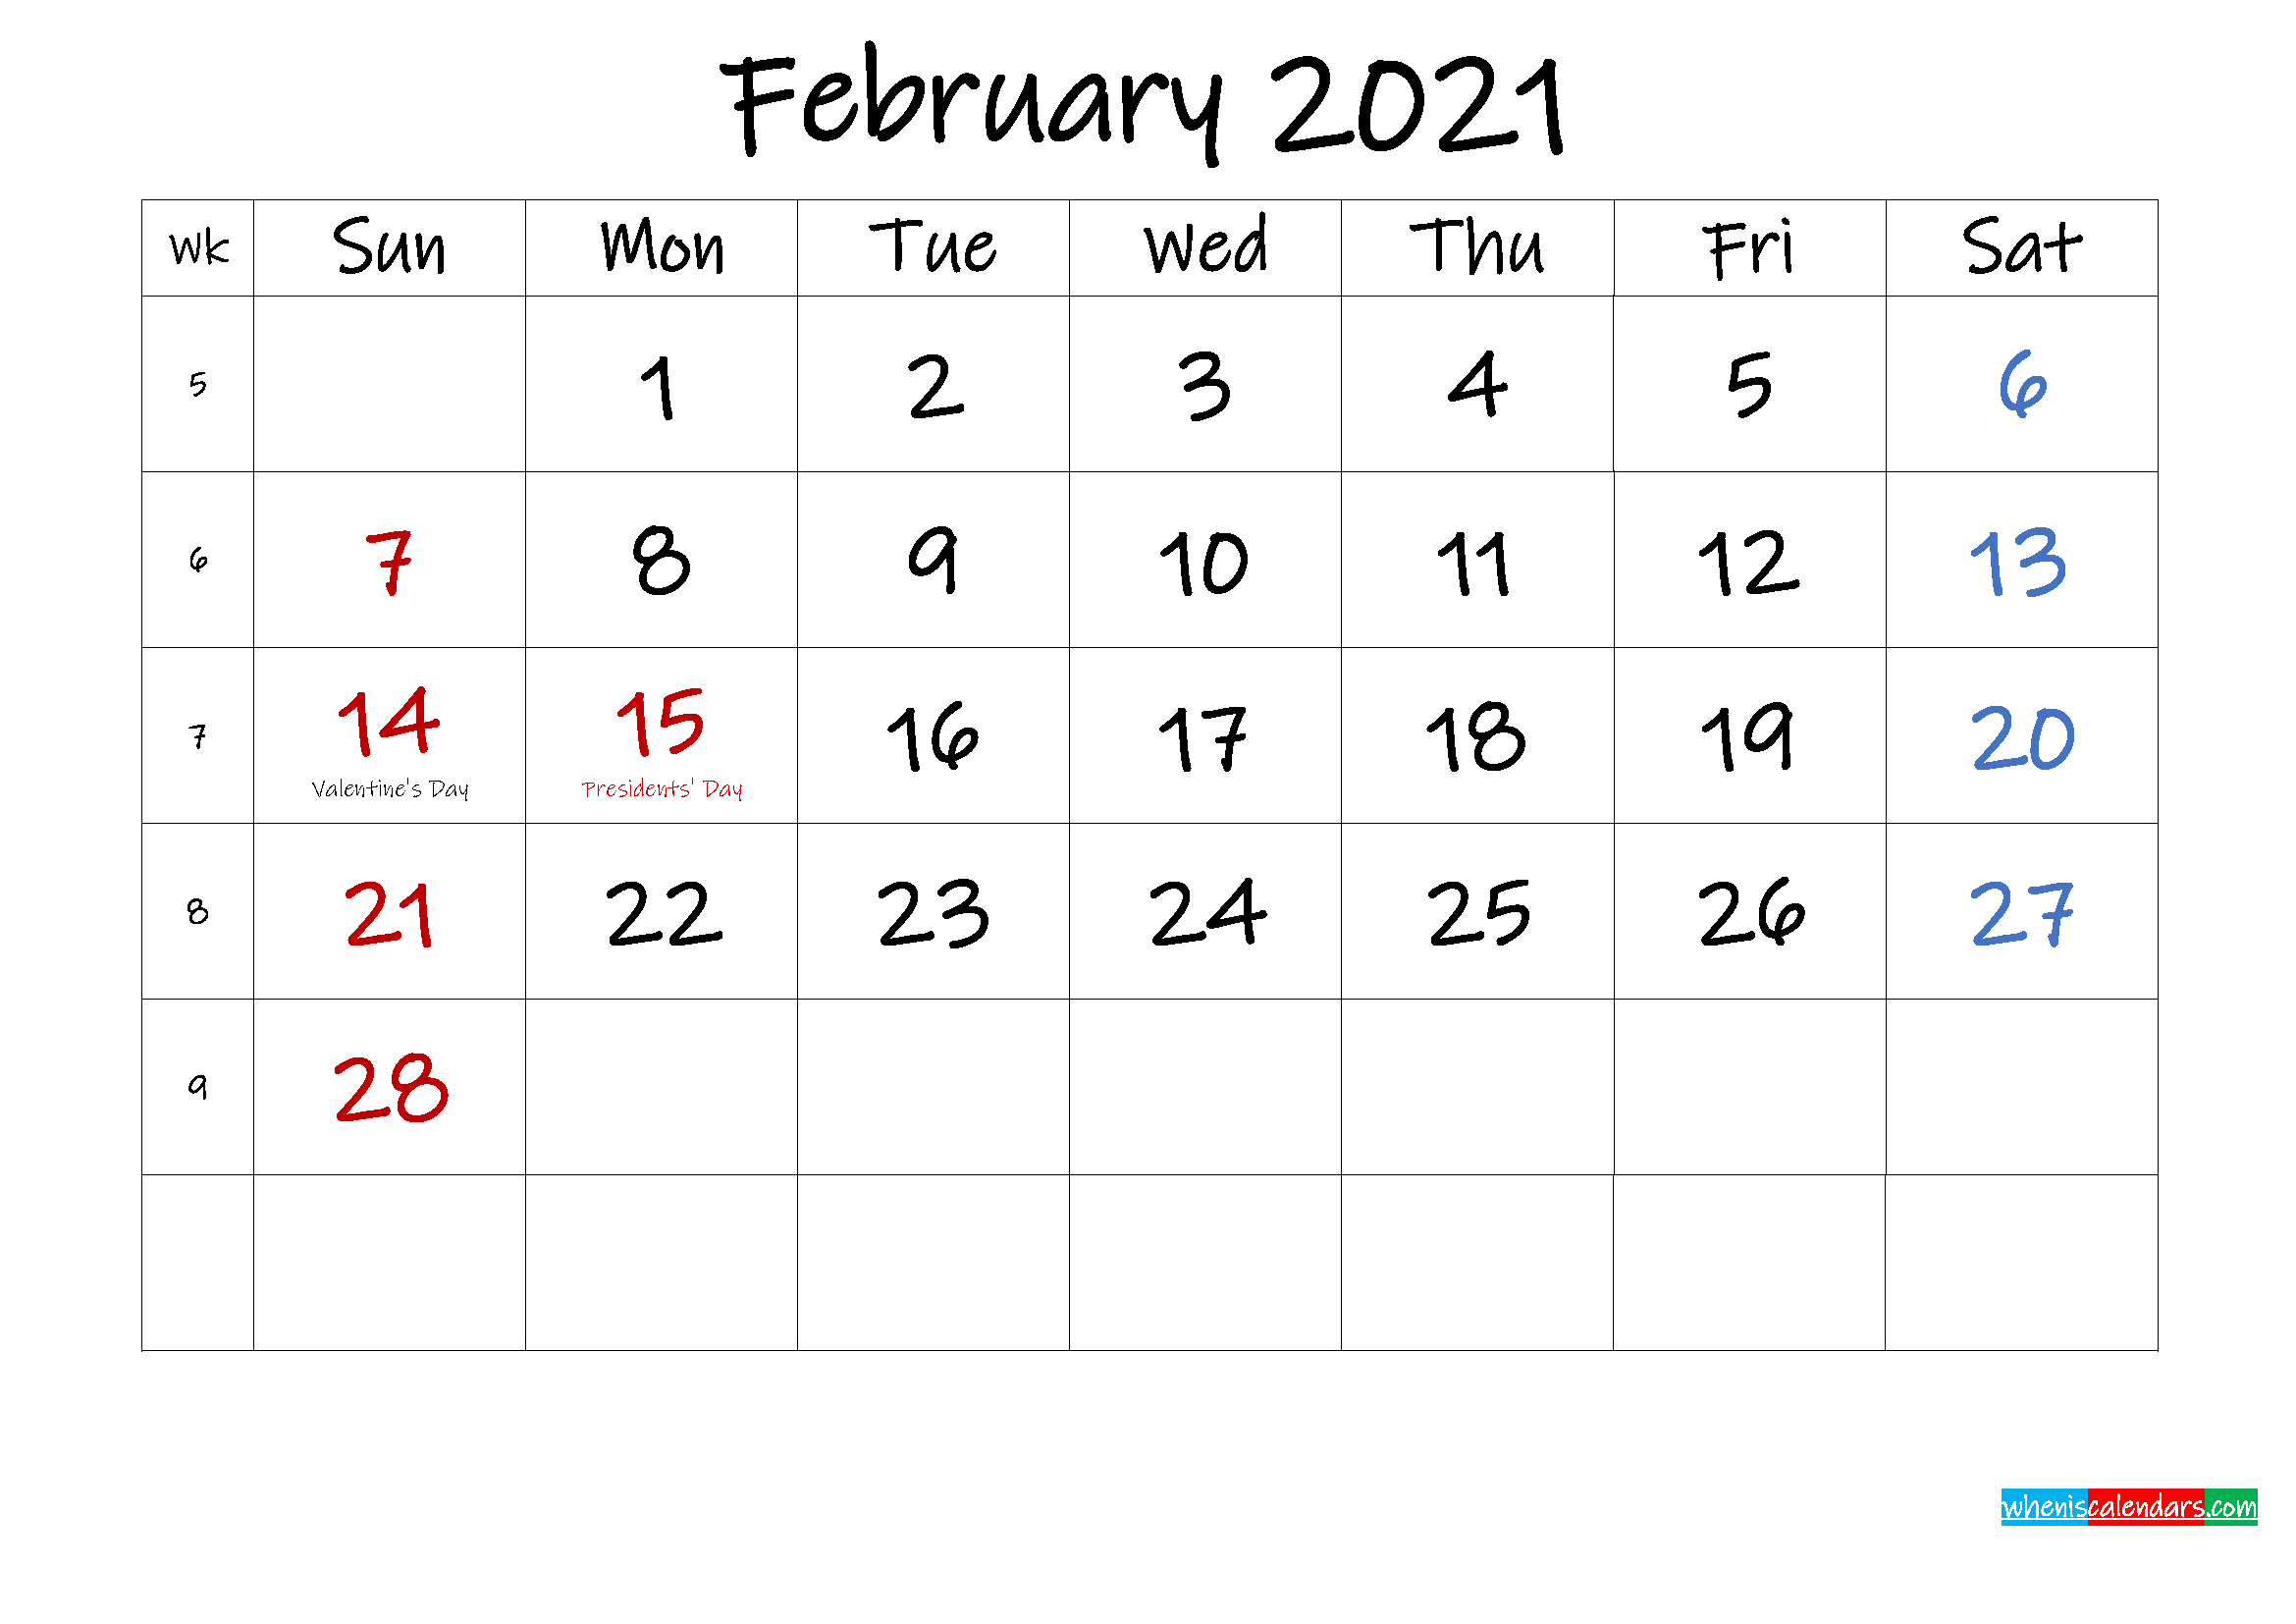 30 Free February 2021 Calendars for Home or Office ...